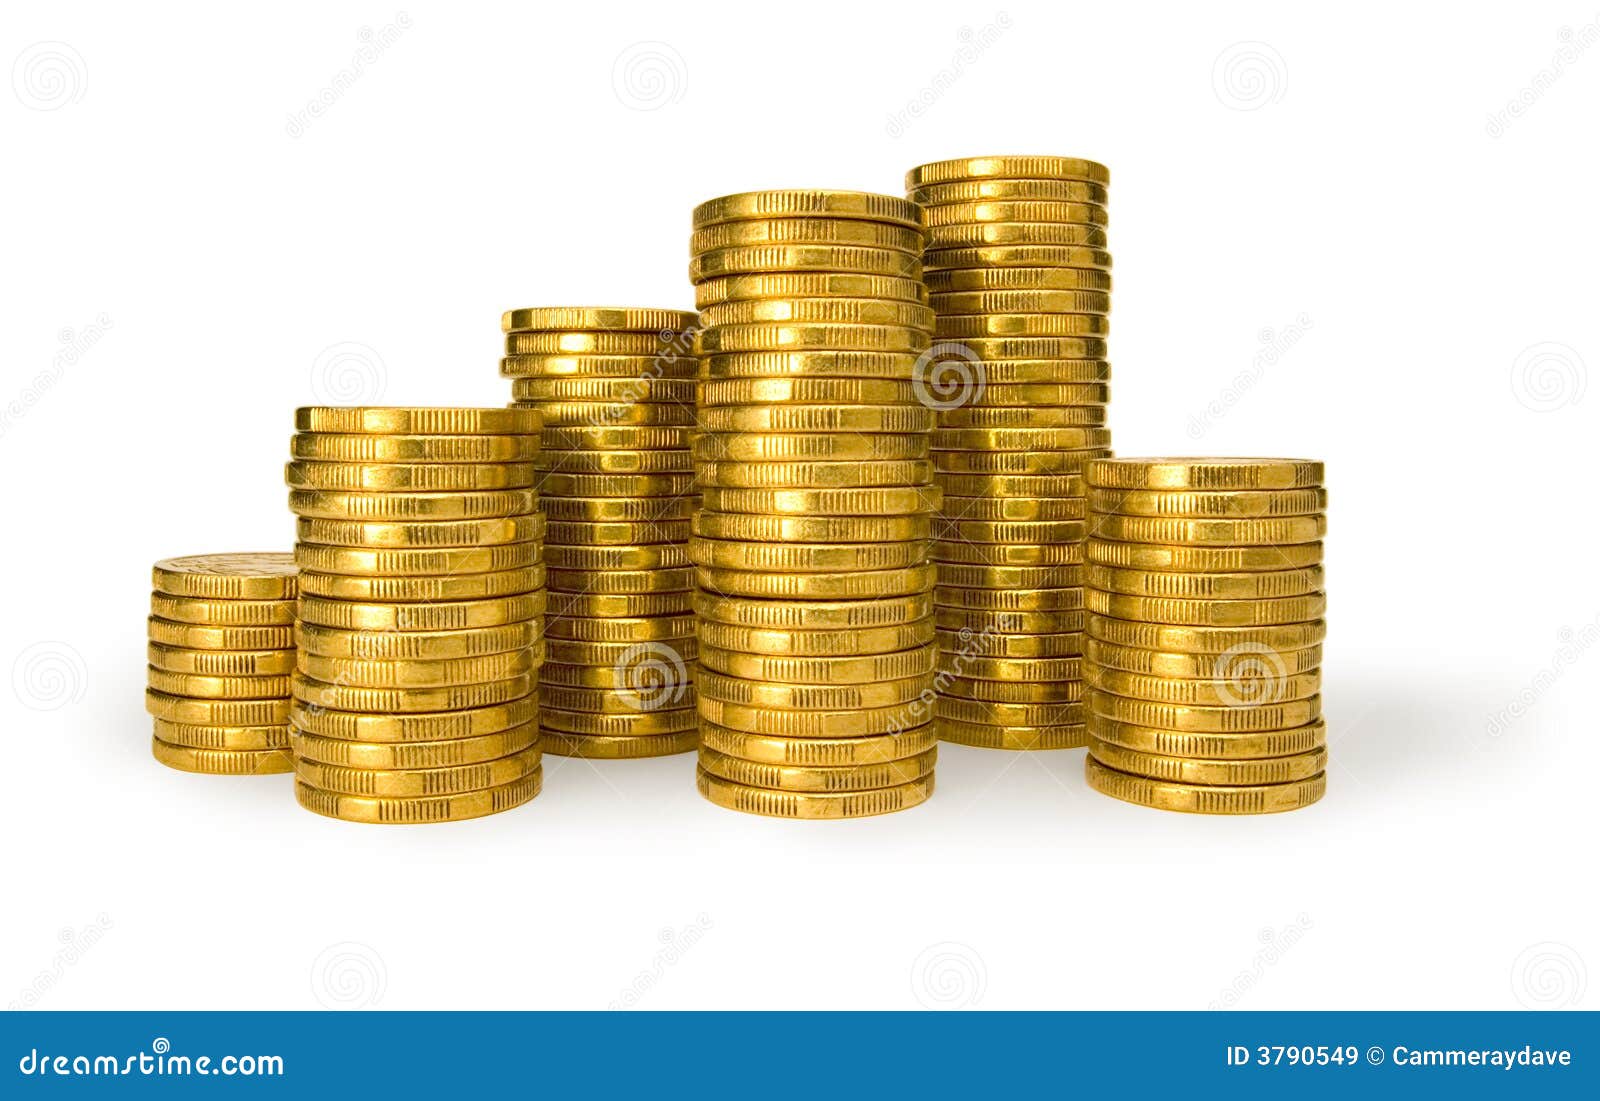 one dollar coin stacks